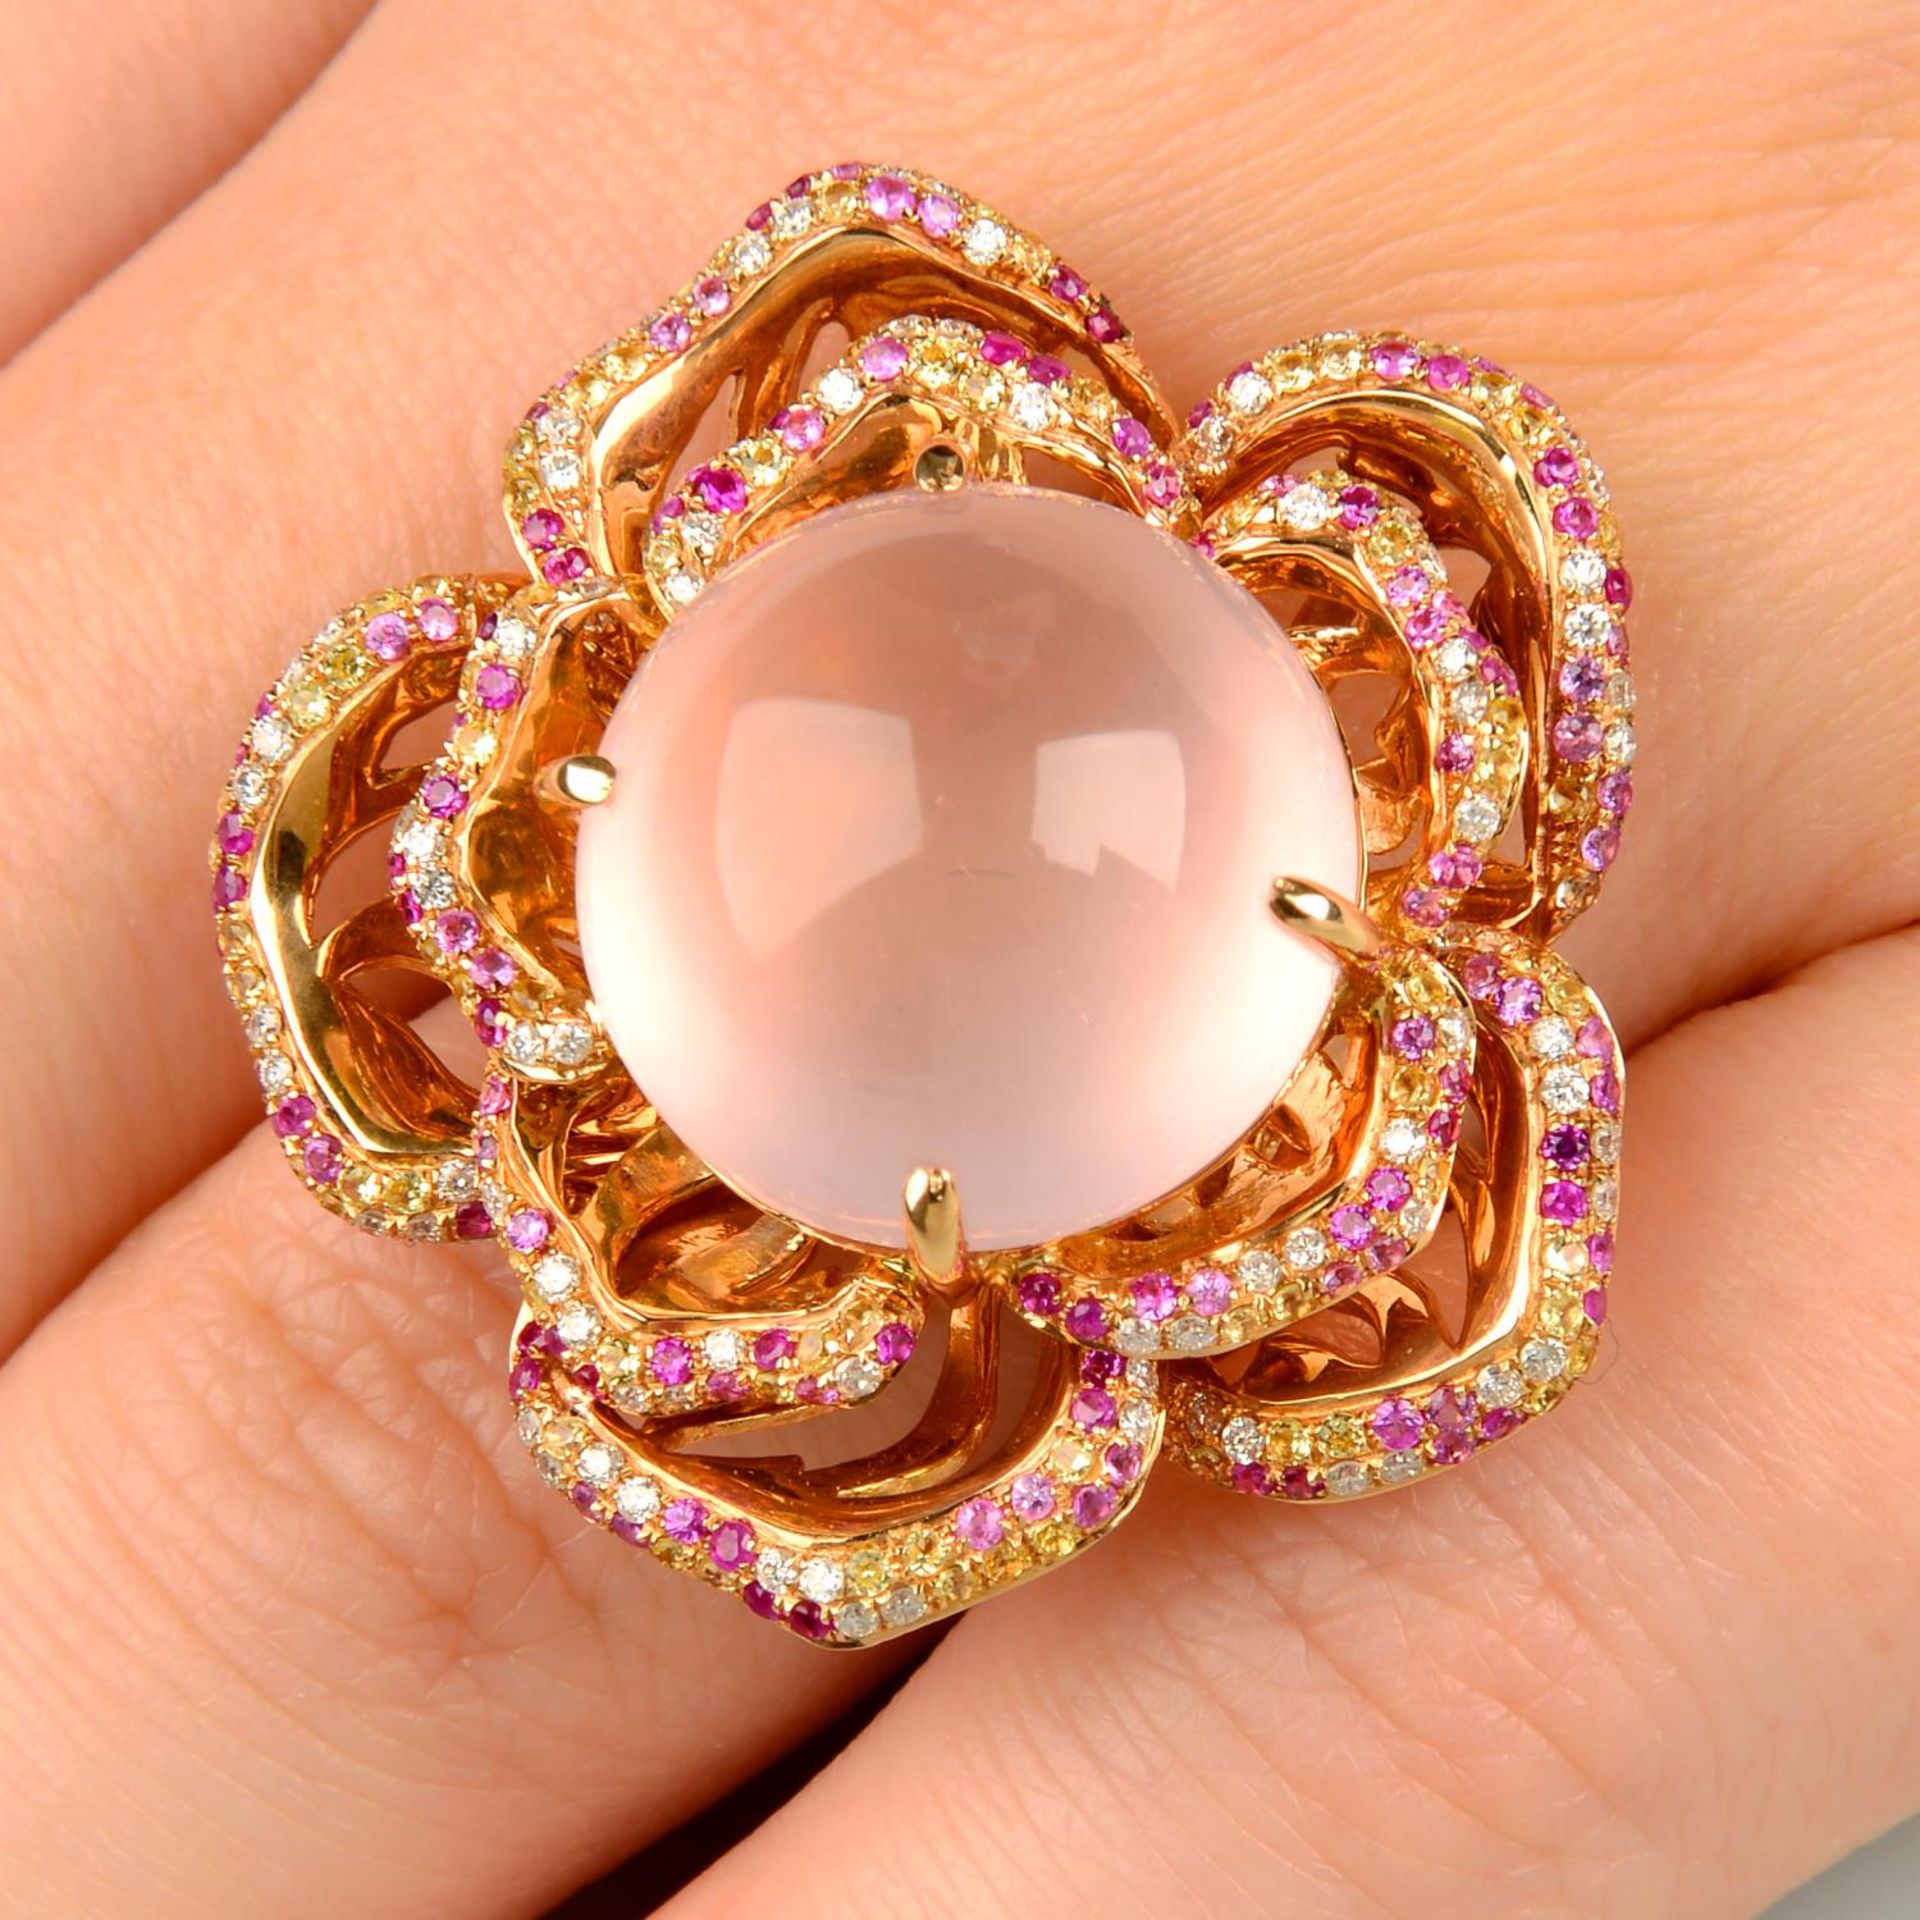 An 18ct gold rose quartz, pink and yellow sapphire and diamond floral dress ring.